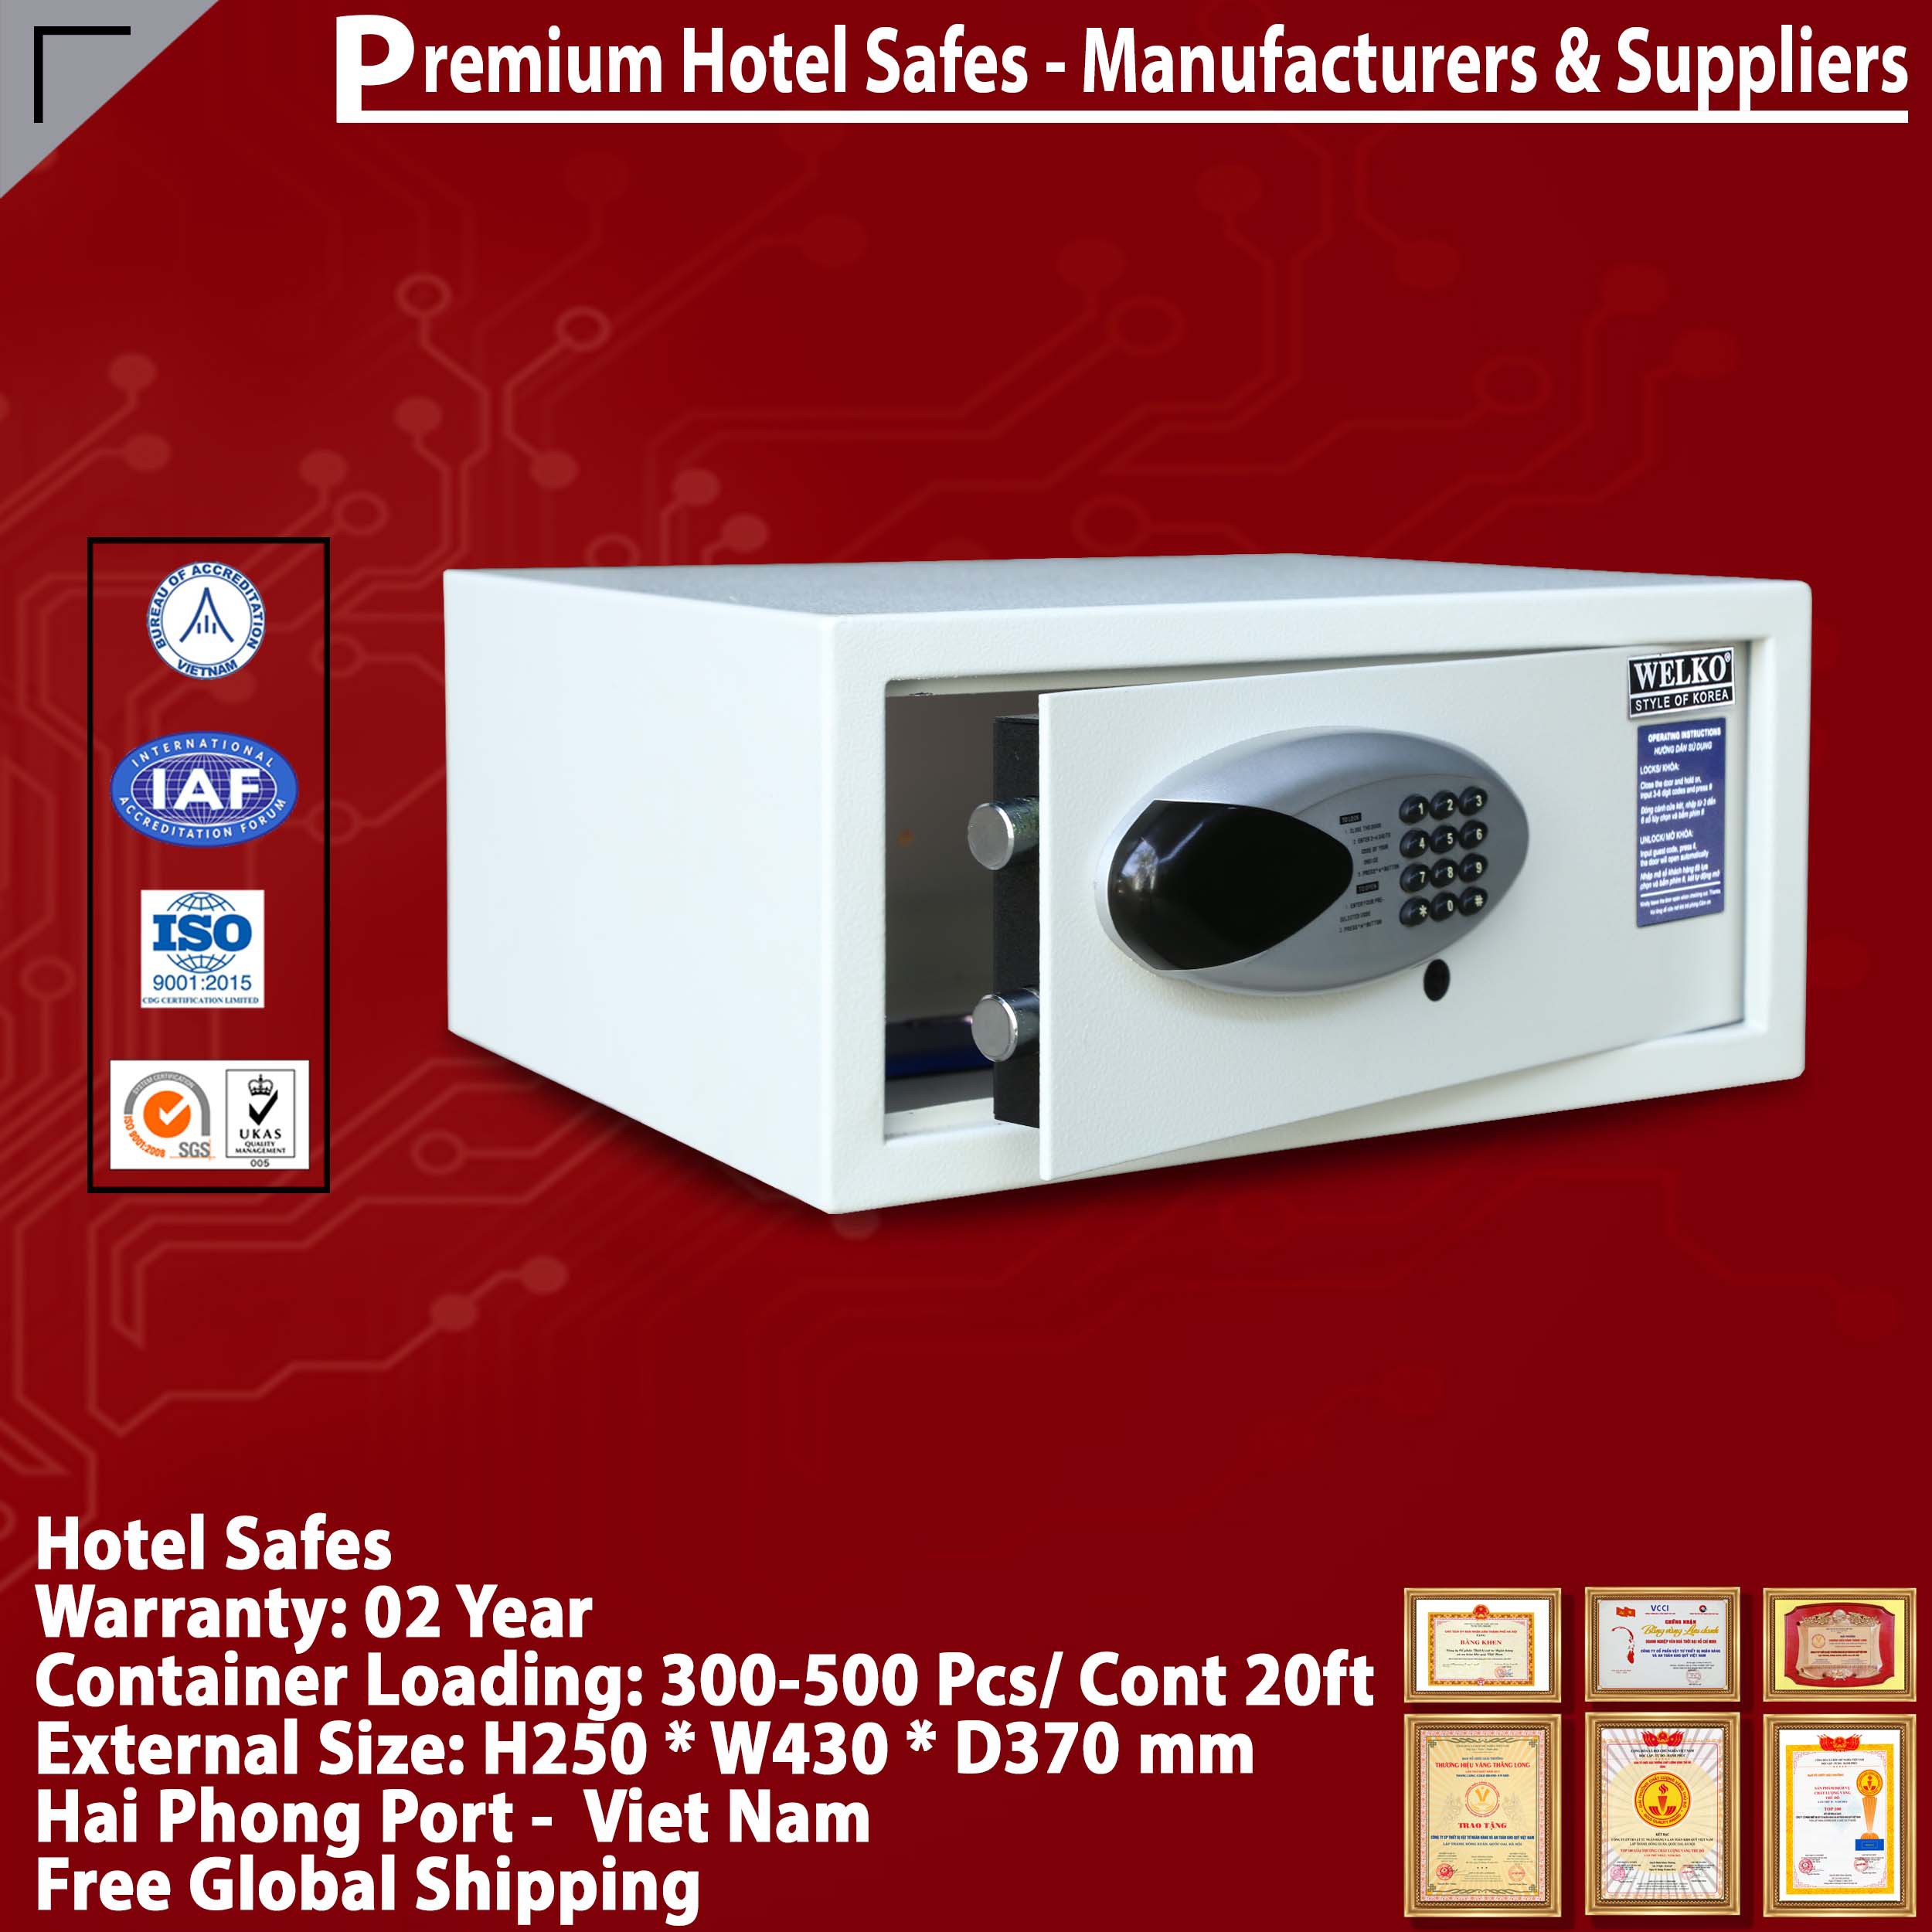 Mesa Best Sellers In Hotel Safes High Quality Price Ratio‎